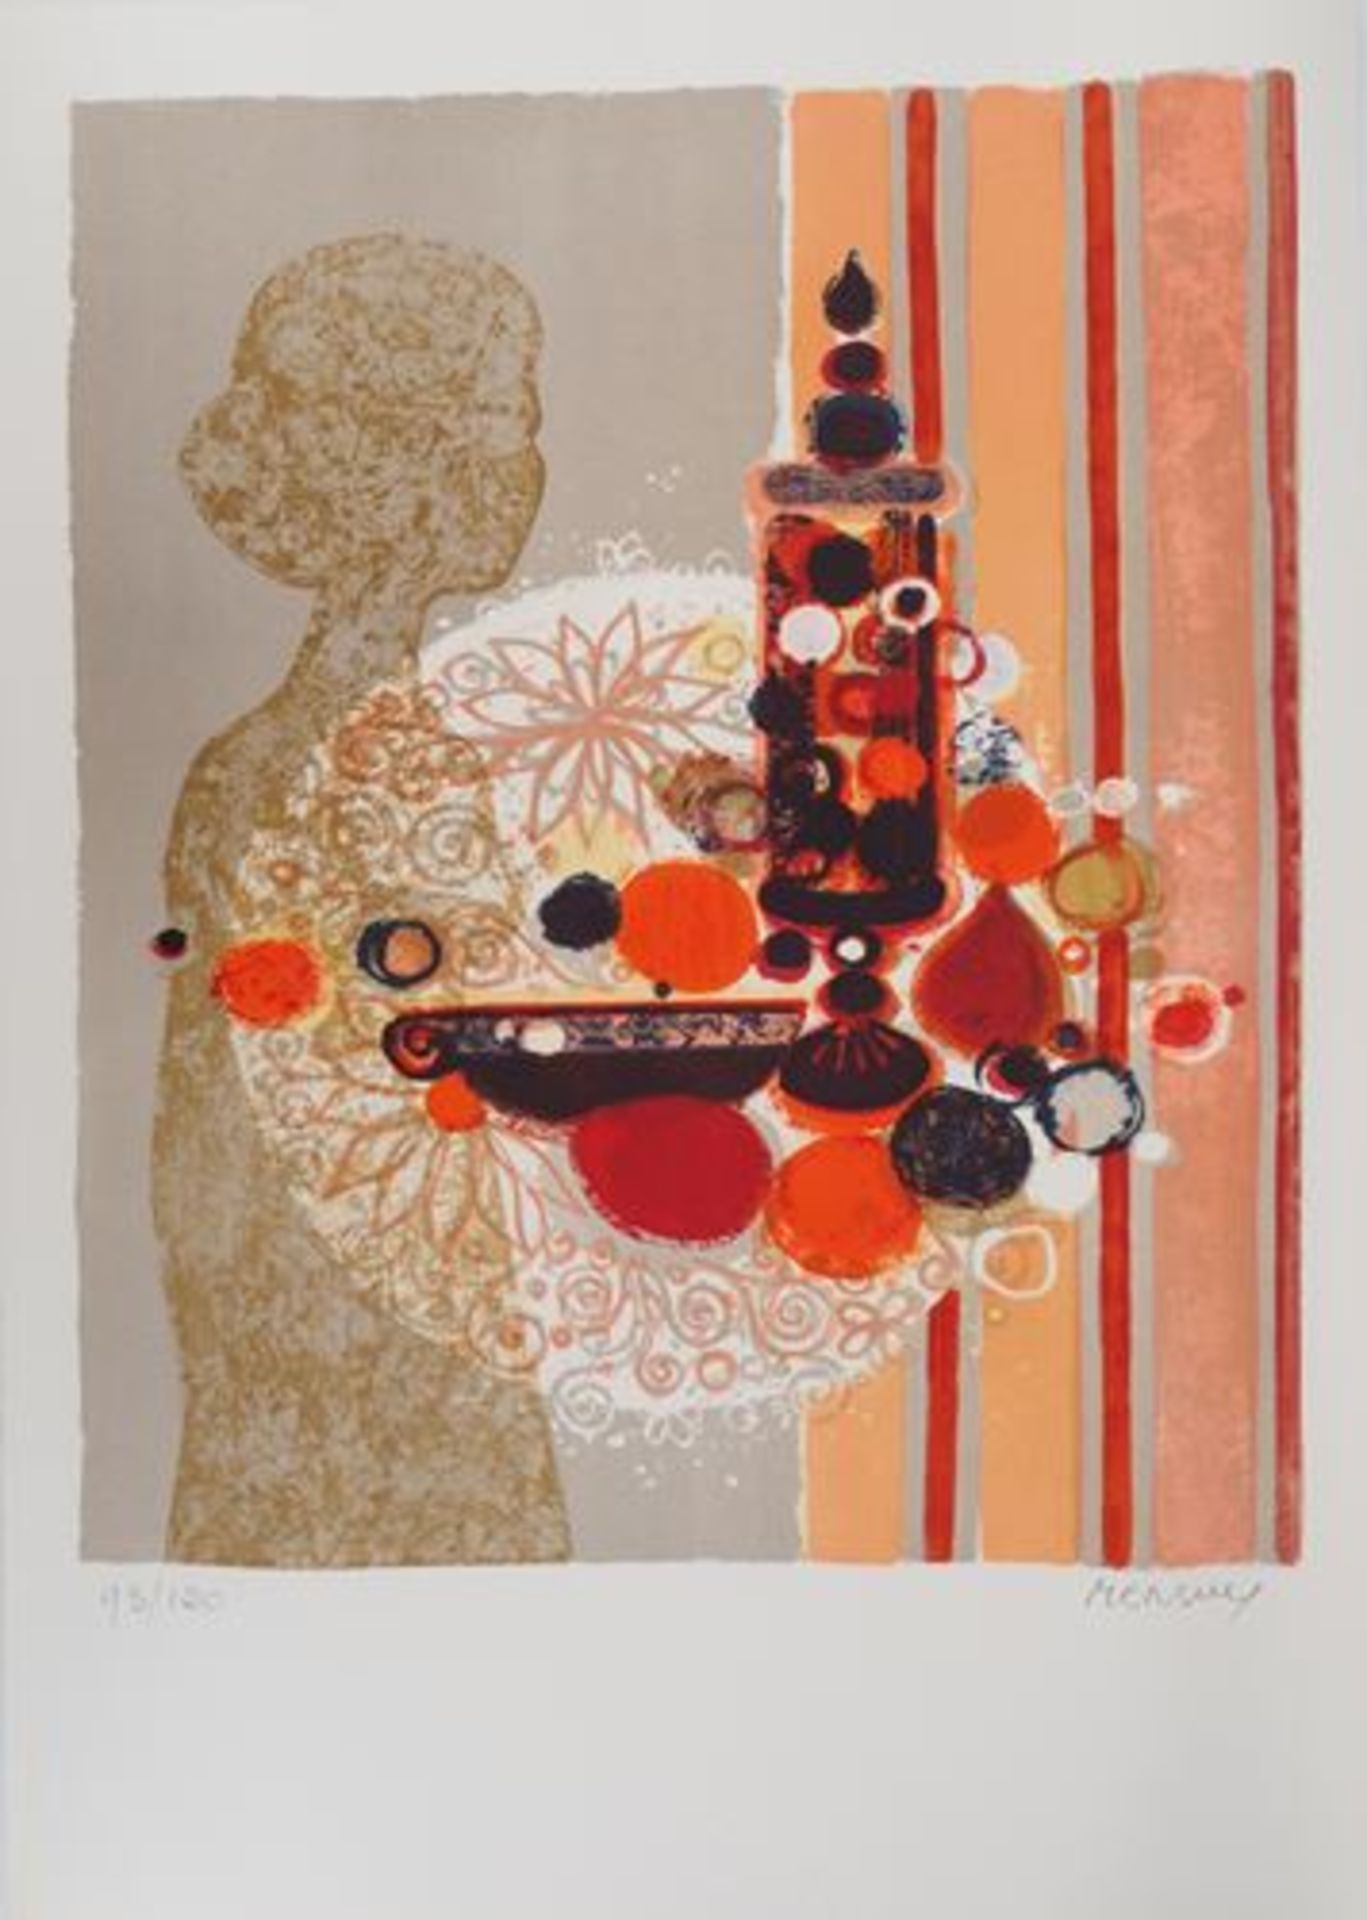 Frédéric MENGUY Intimacy, 1973 Original lithograph Signed in pencil [...]